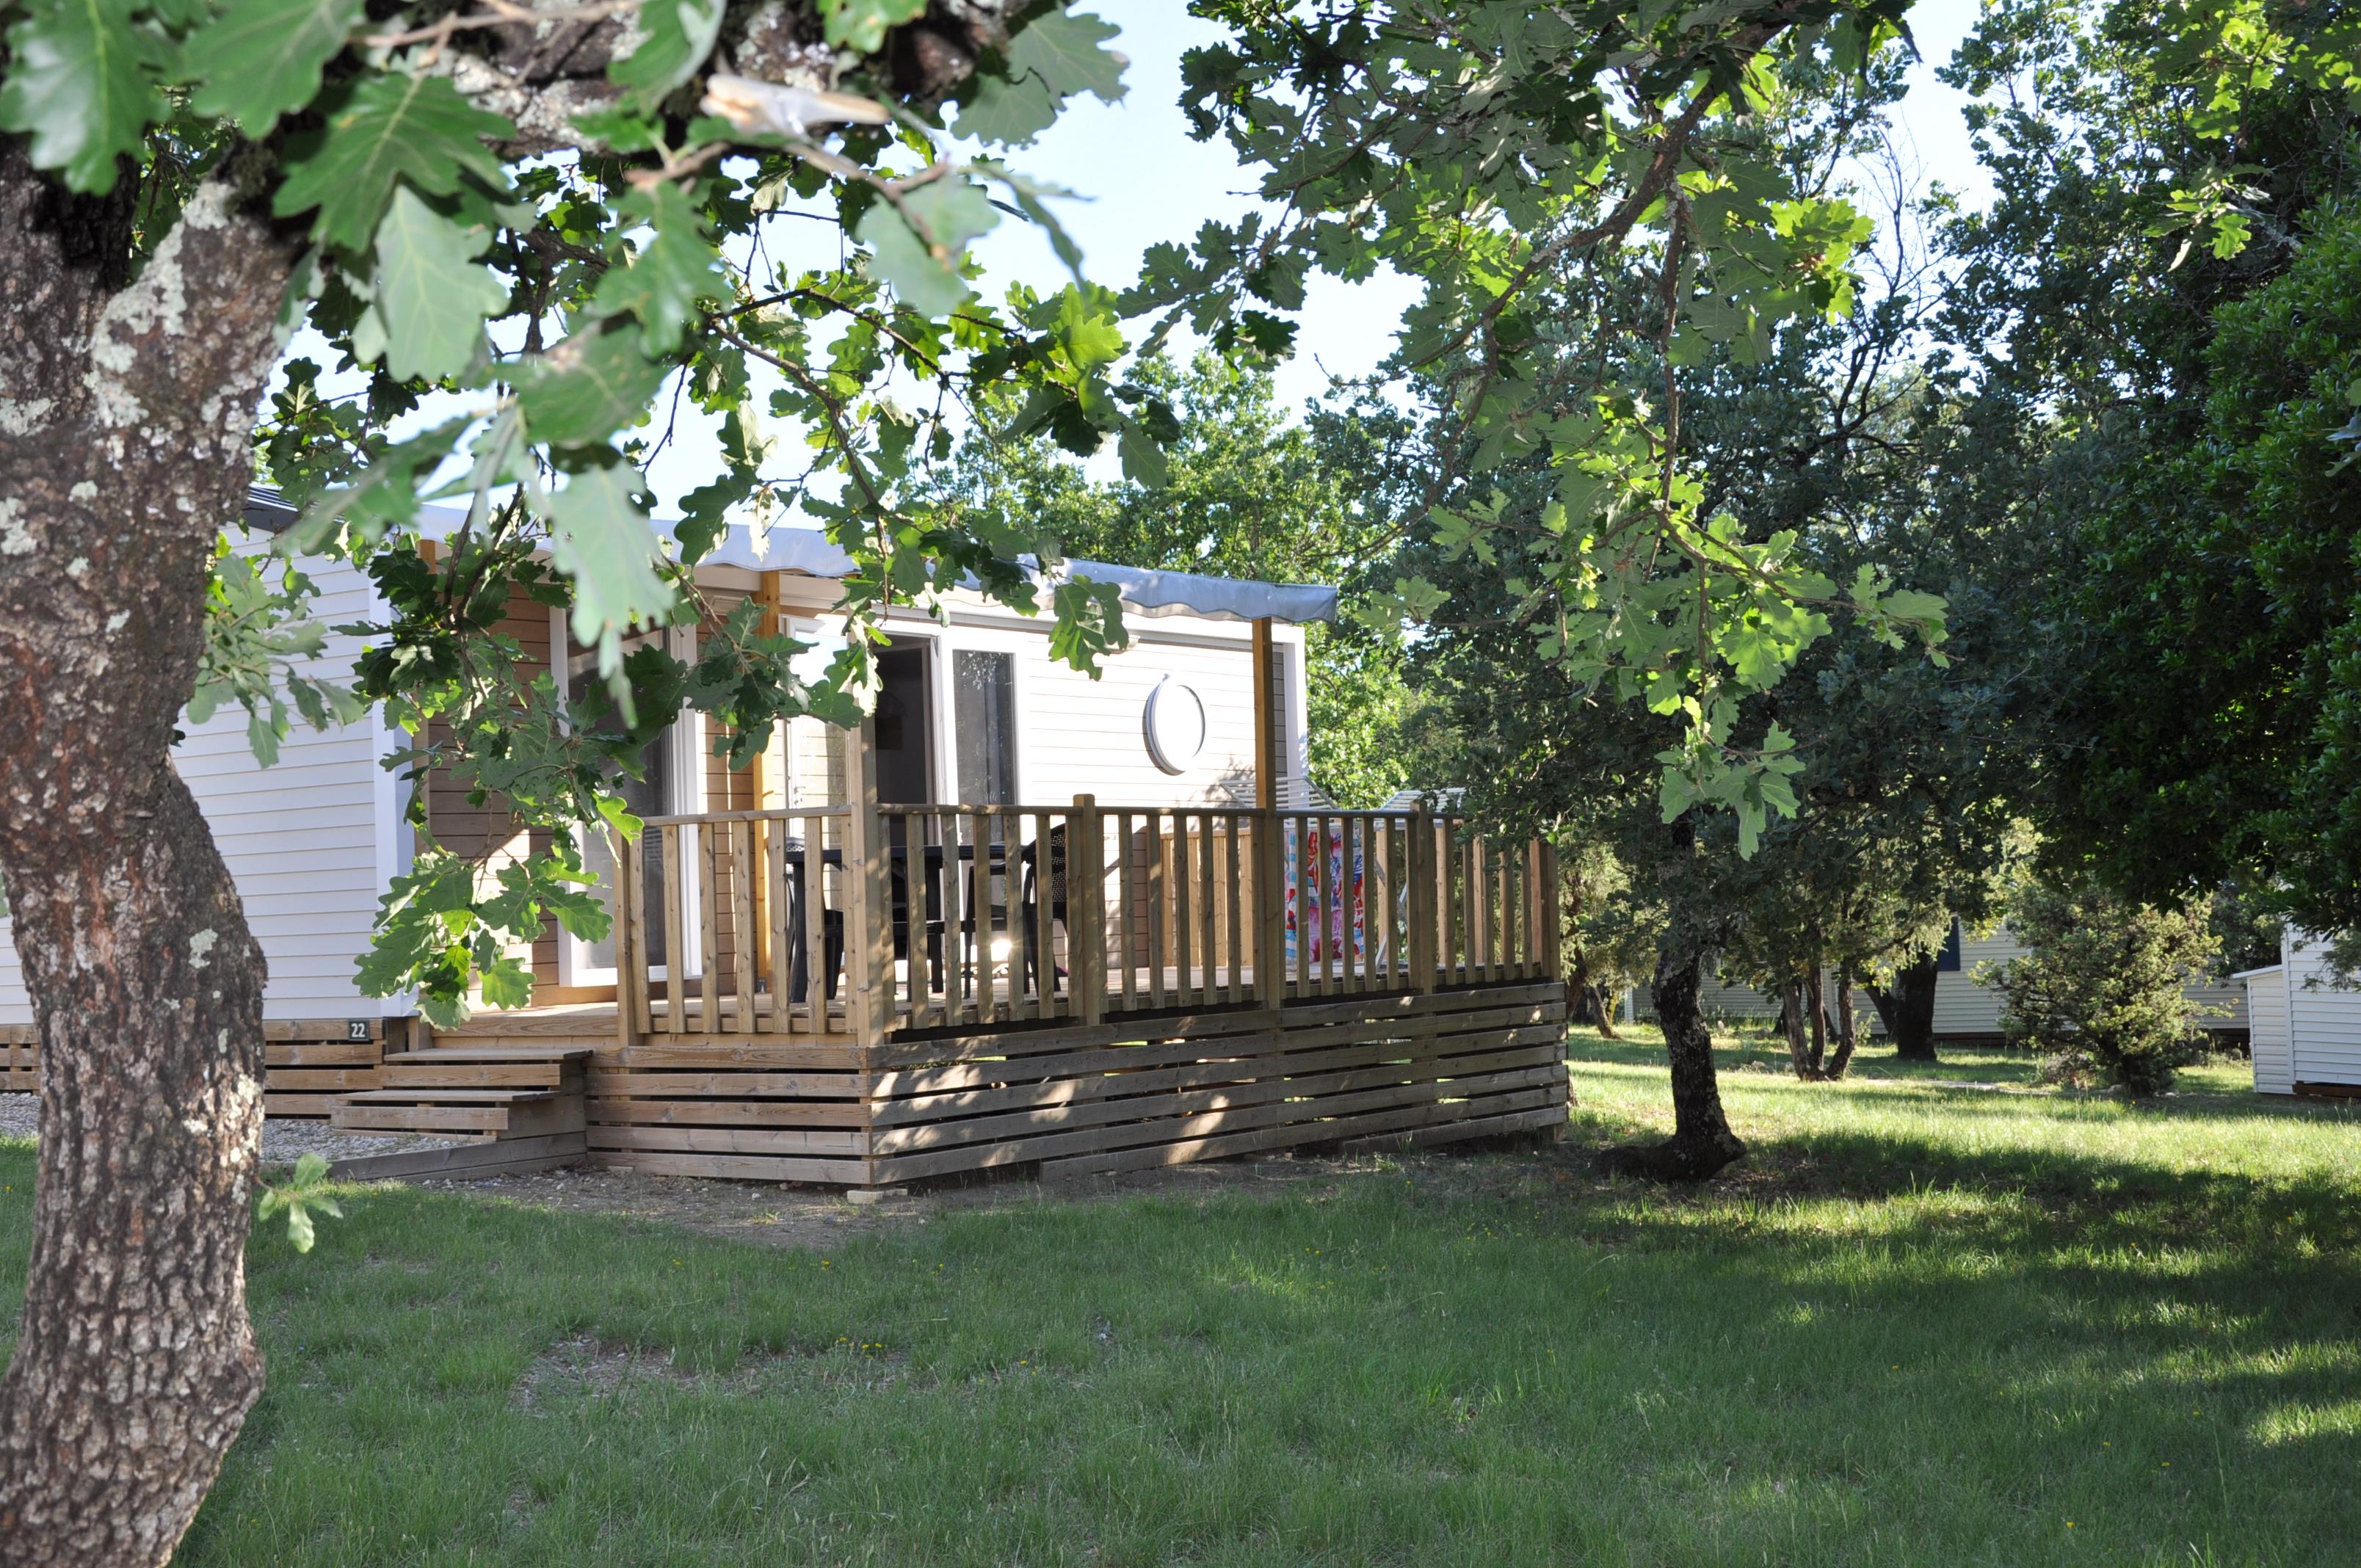 Huuraccommodatie - Cottage Premium Aircon S (30M² + 18M² Covered Terrace,  2 Bedrooms) - Camping L'Ombrage